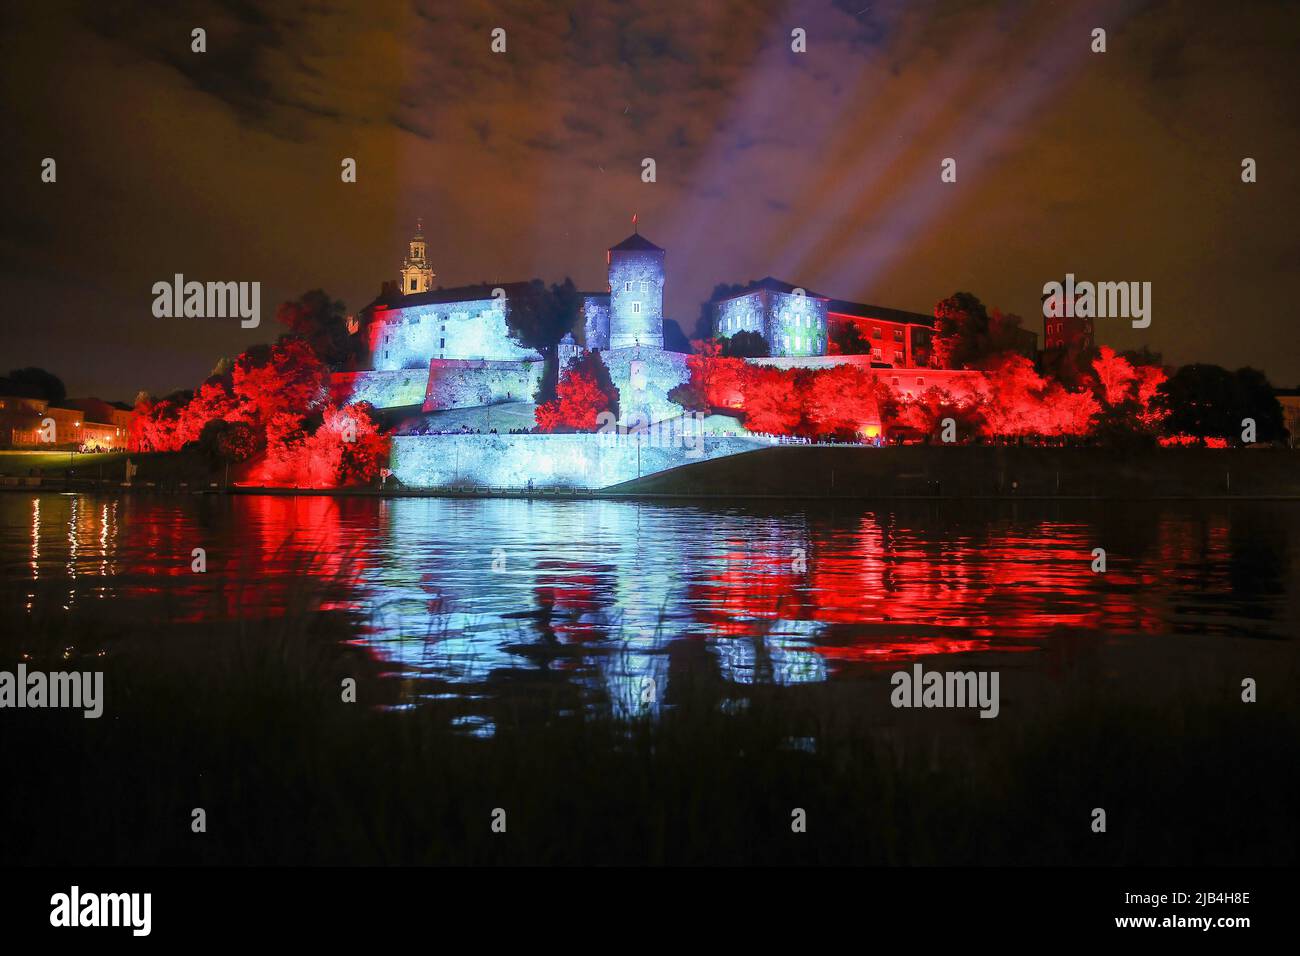 A night view of Wawel Castle illuminated with themes from the TV-show 'Stranger Things', as a part of a promotion campaign for the latest season. Stock Photo